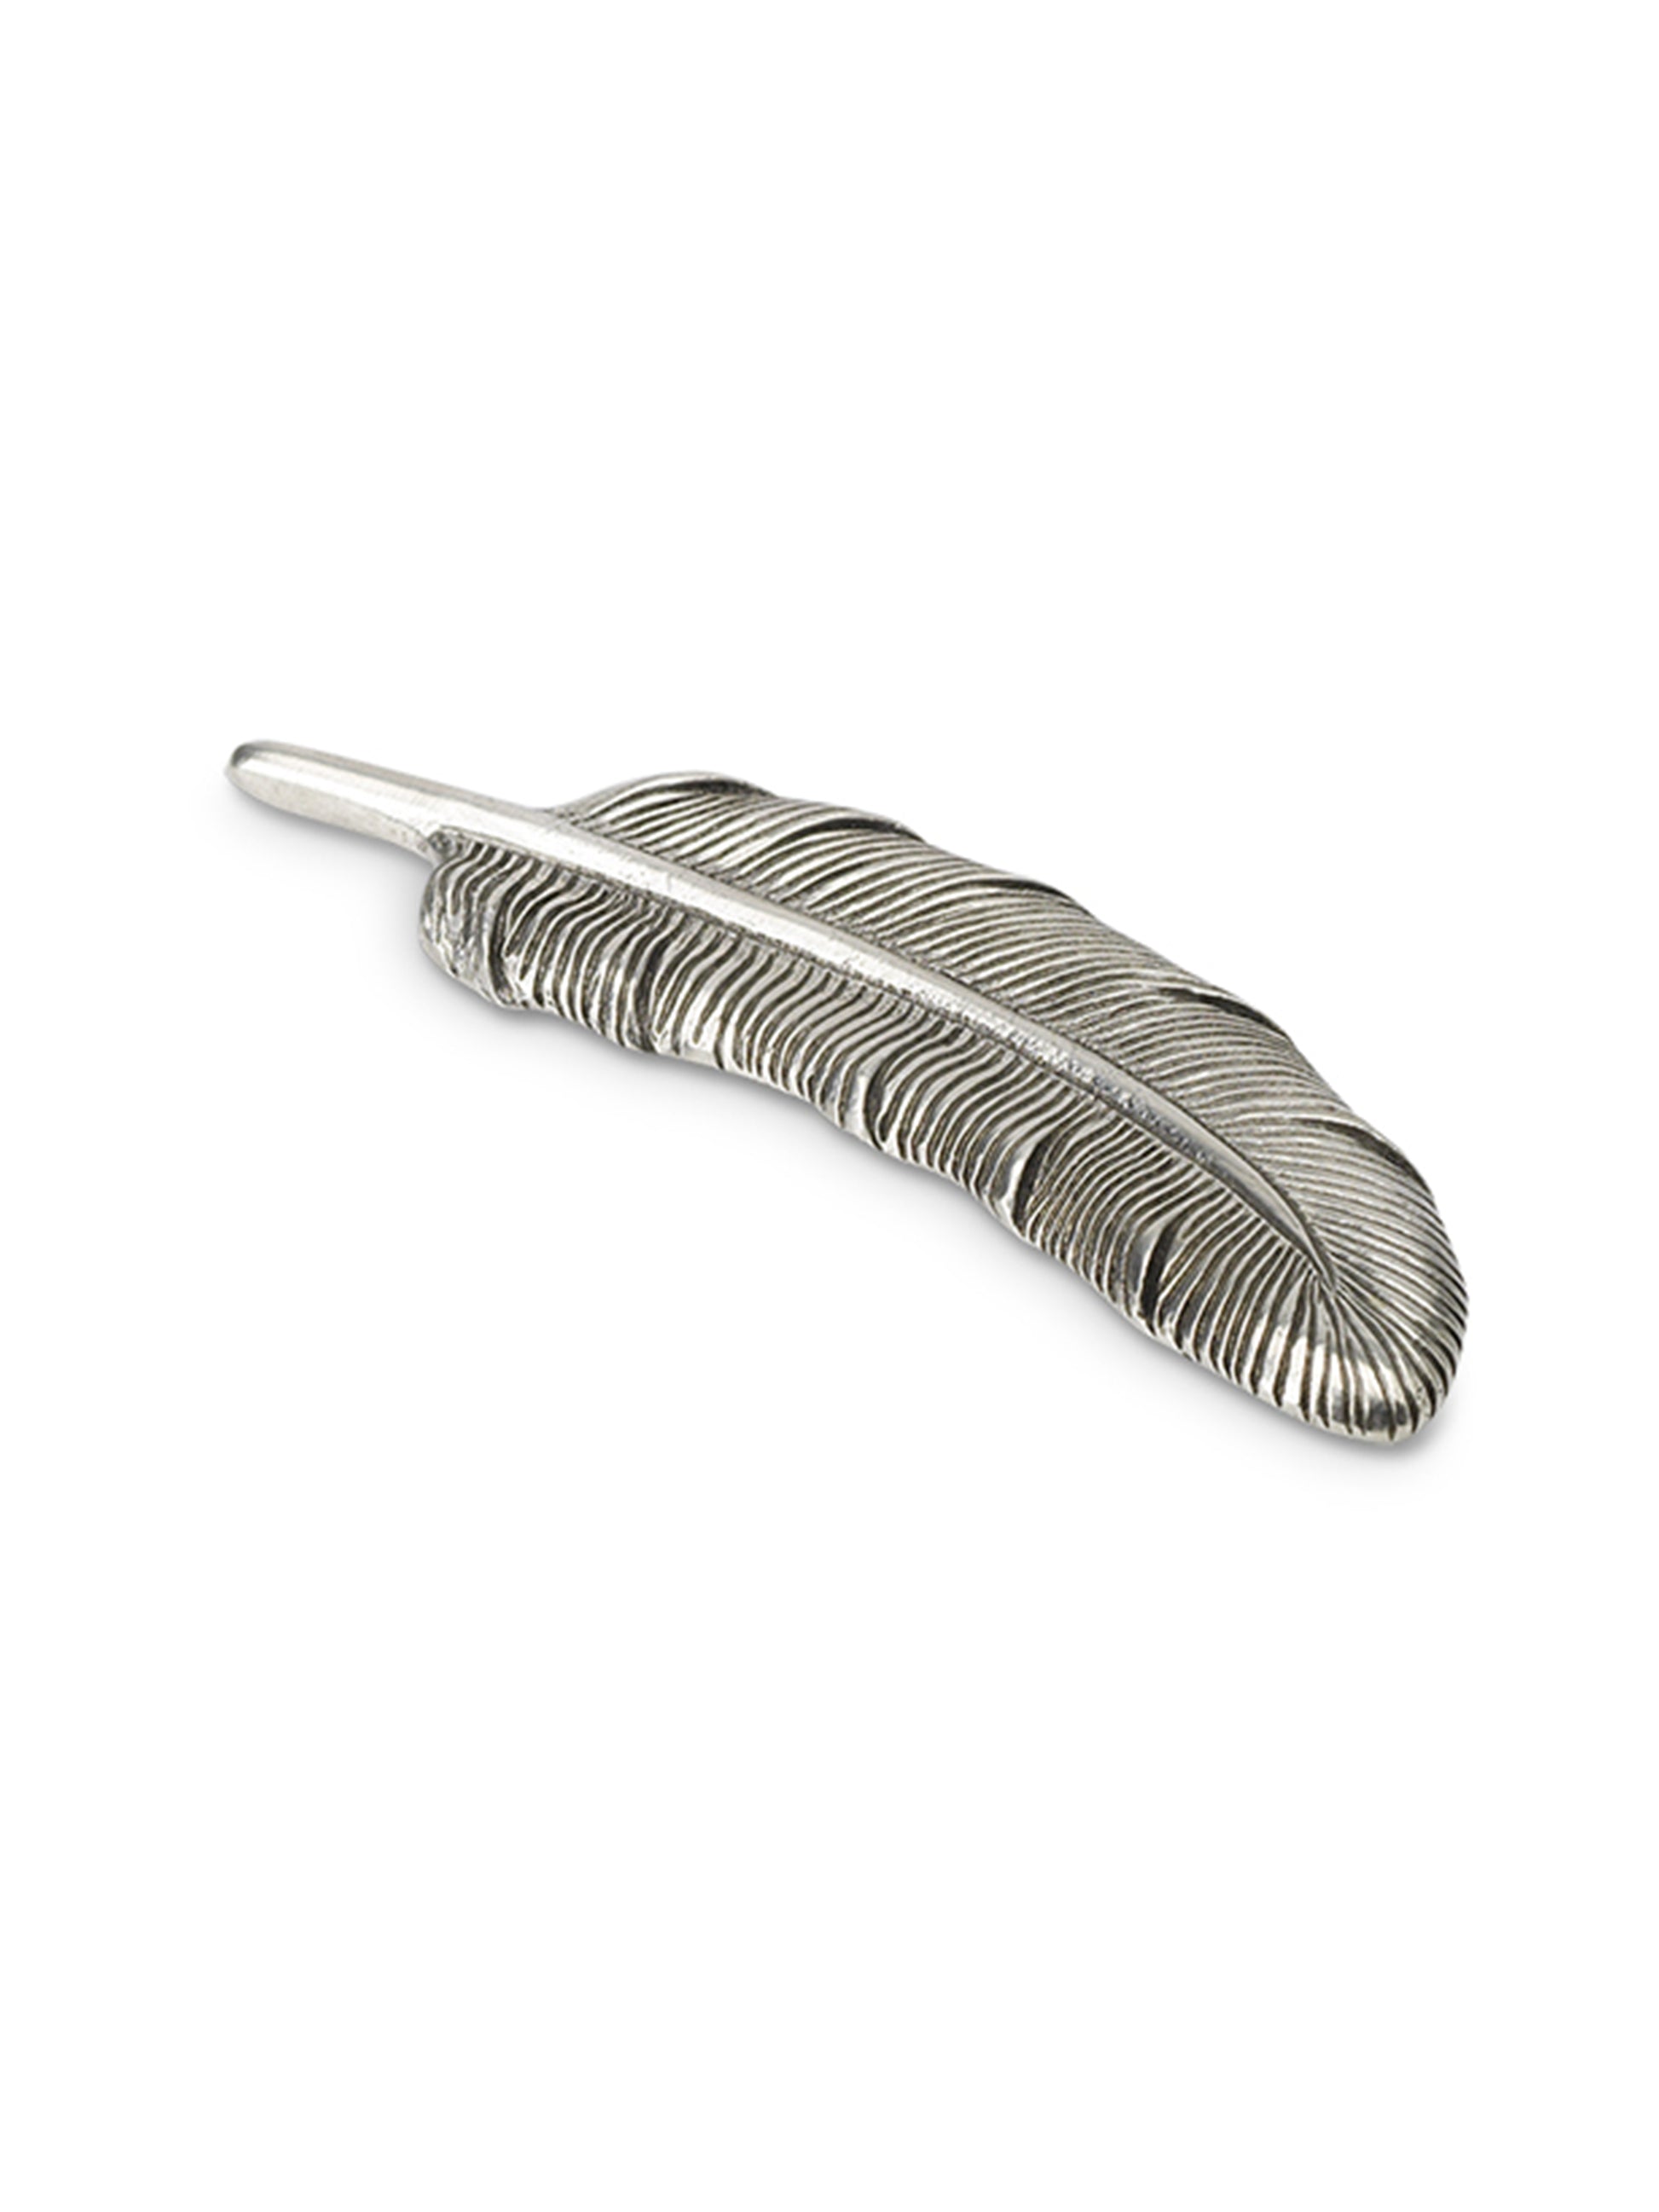 MATCH Pewter Feather Paper Weight Weston Table